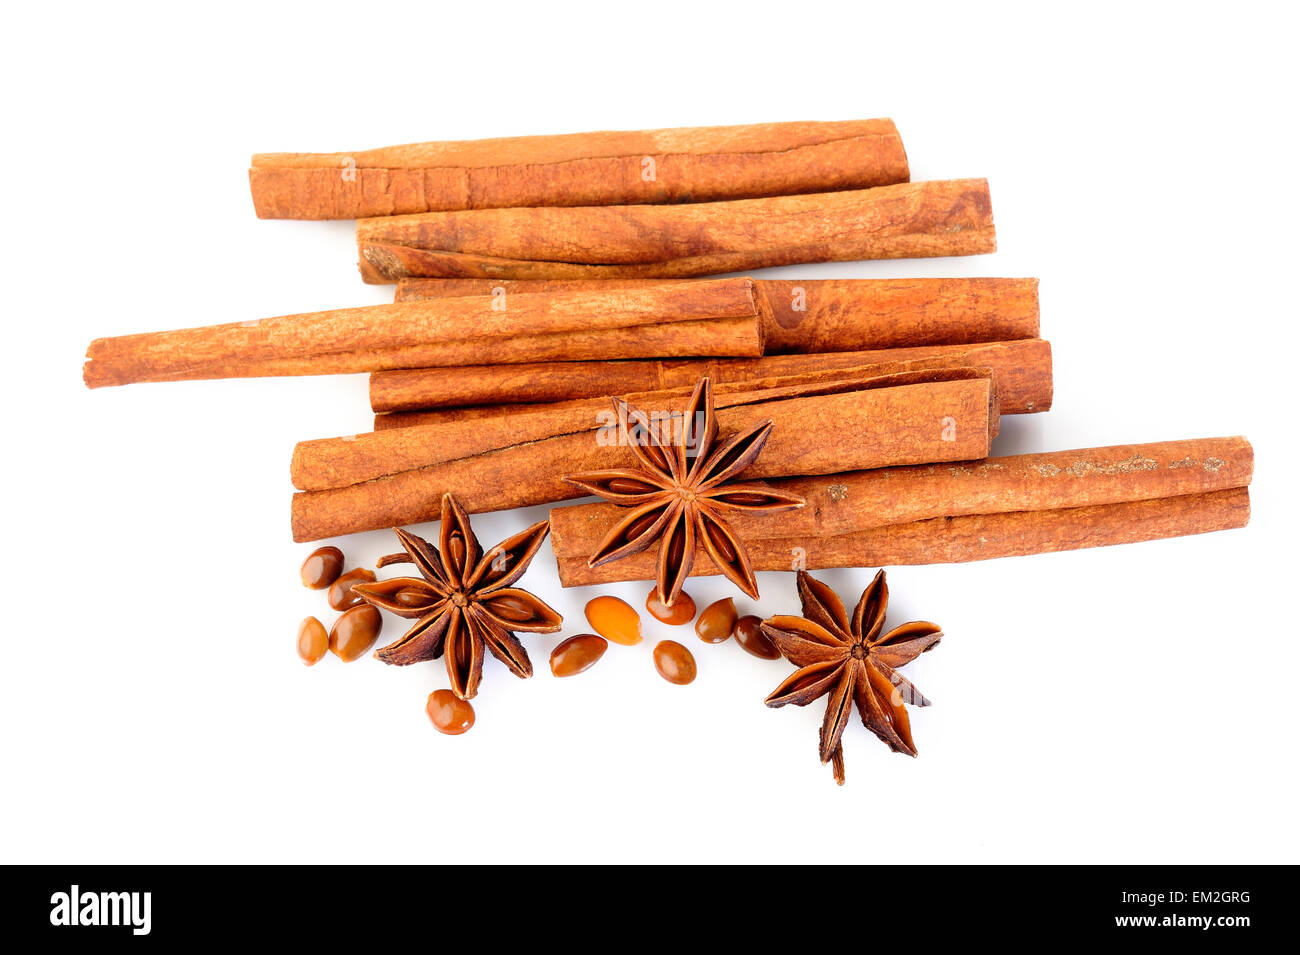 cinnamon stick and star anise spice Stock Photo